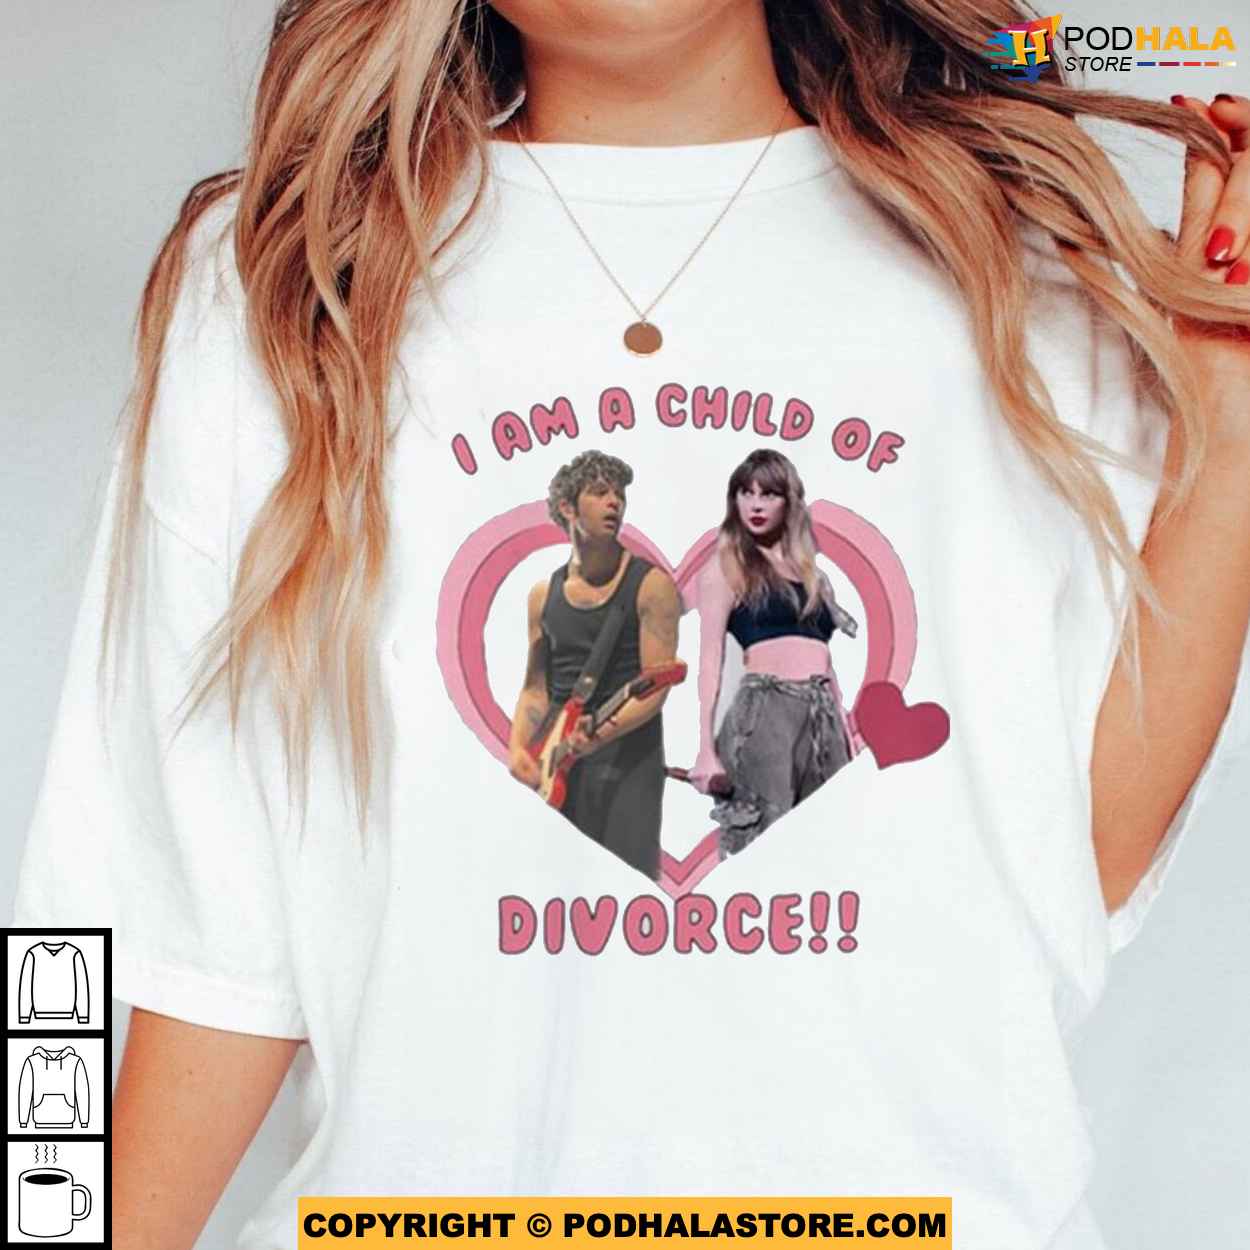 Matty Healy and Taylor Inspired I Am A Child Of Divorce Shirt For Fans